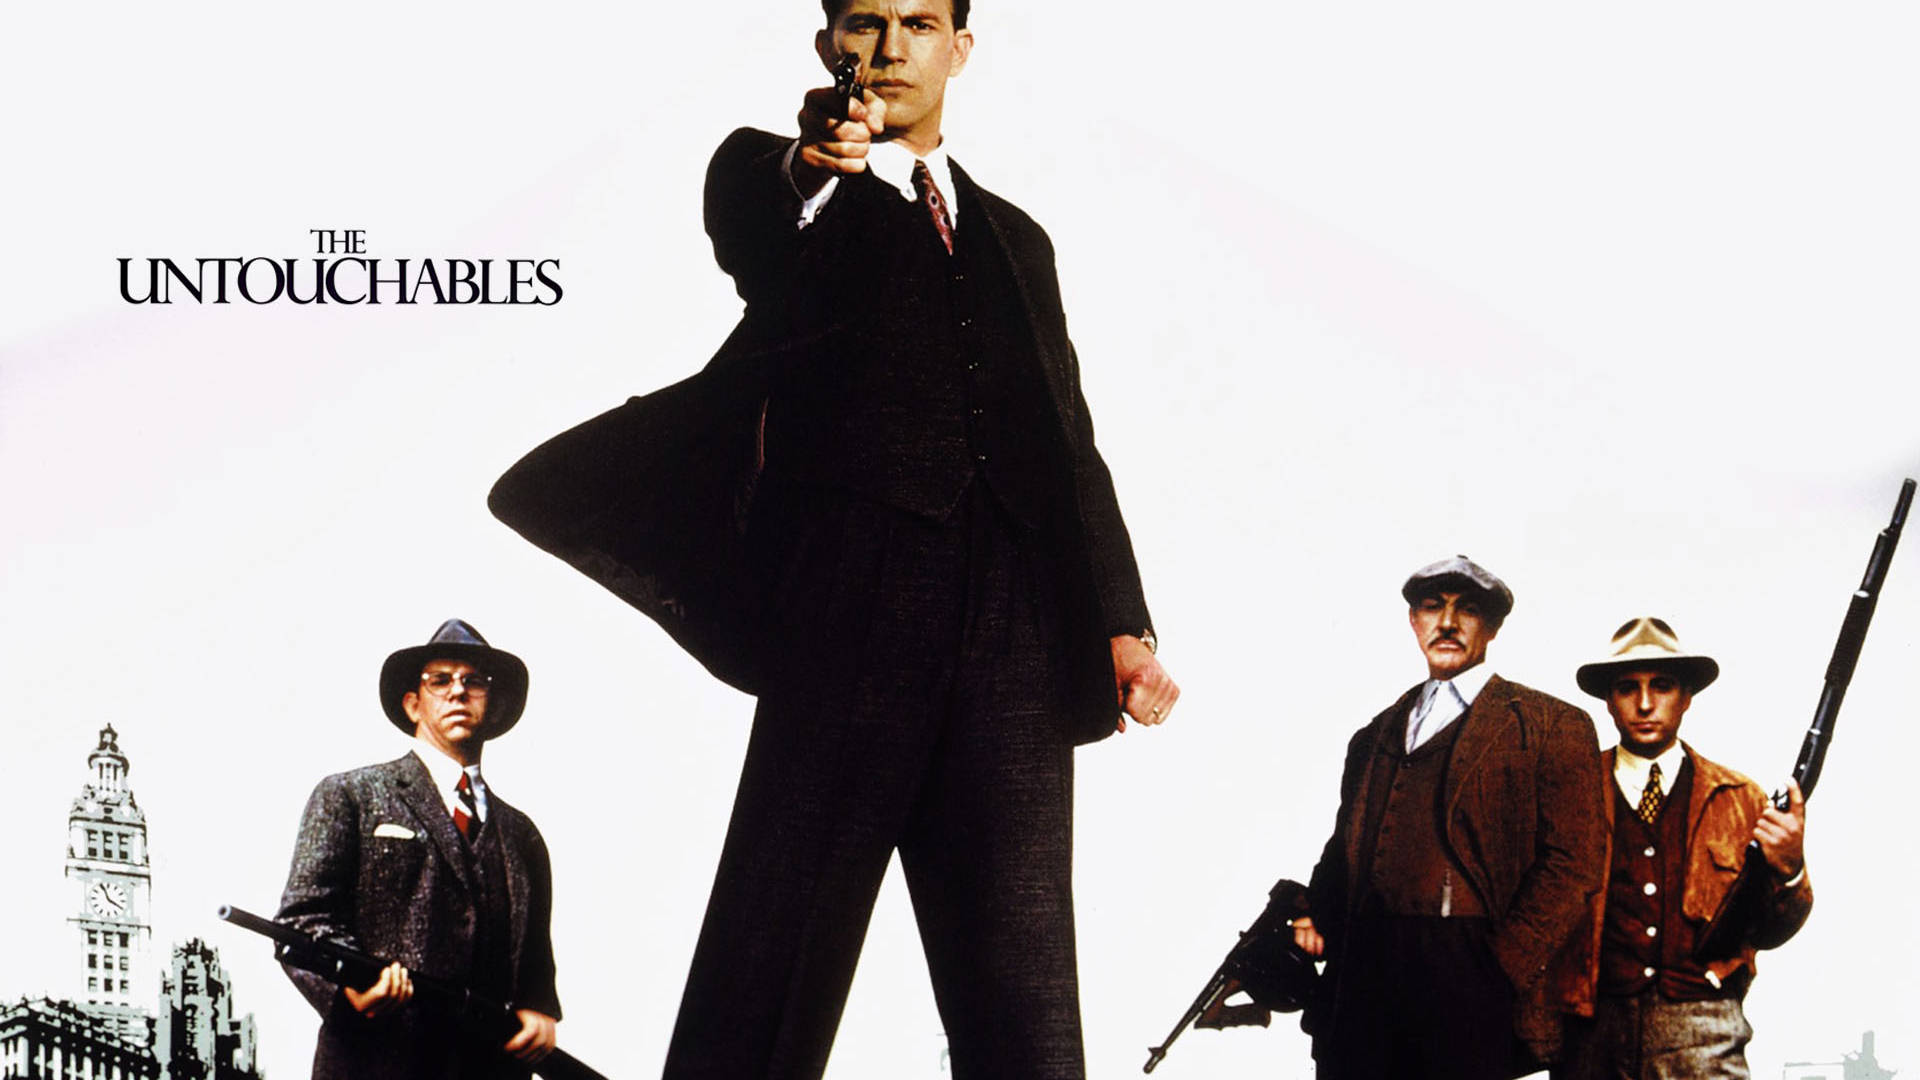 The Untouchables Gangster